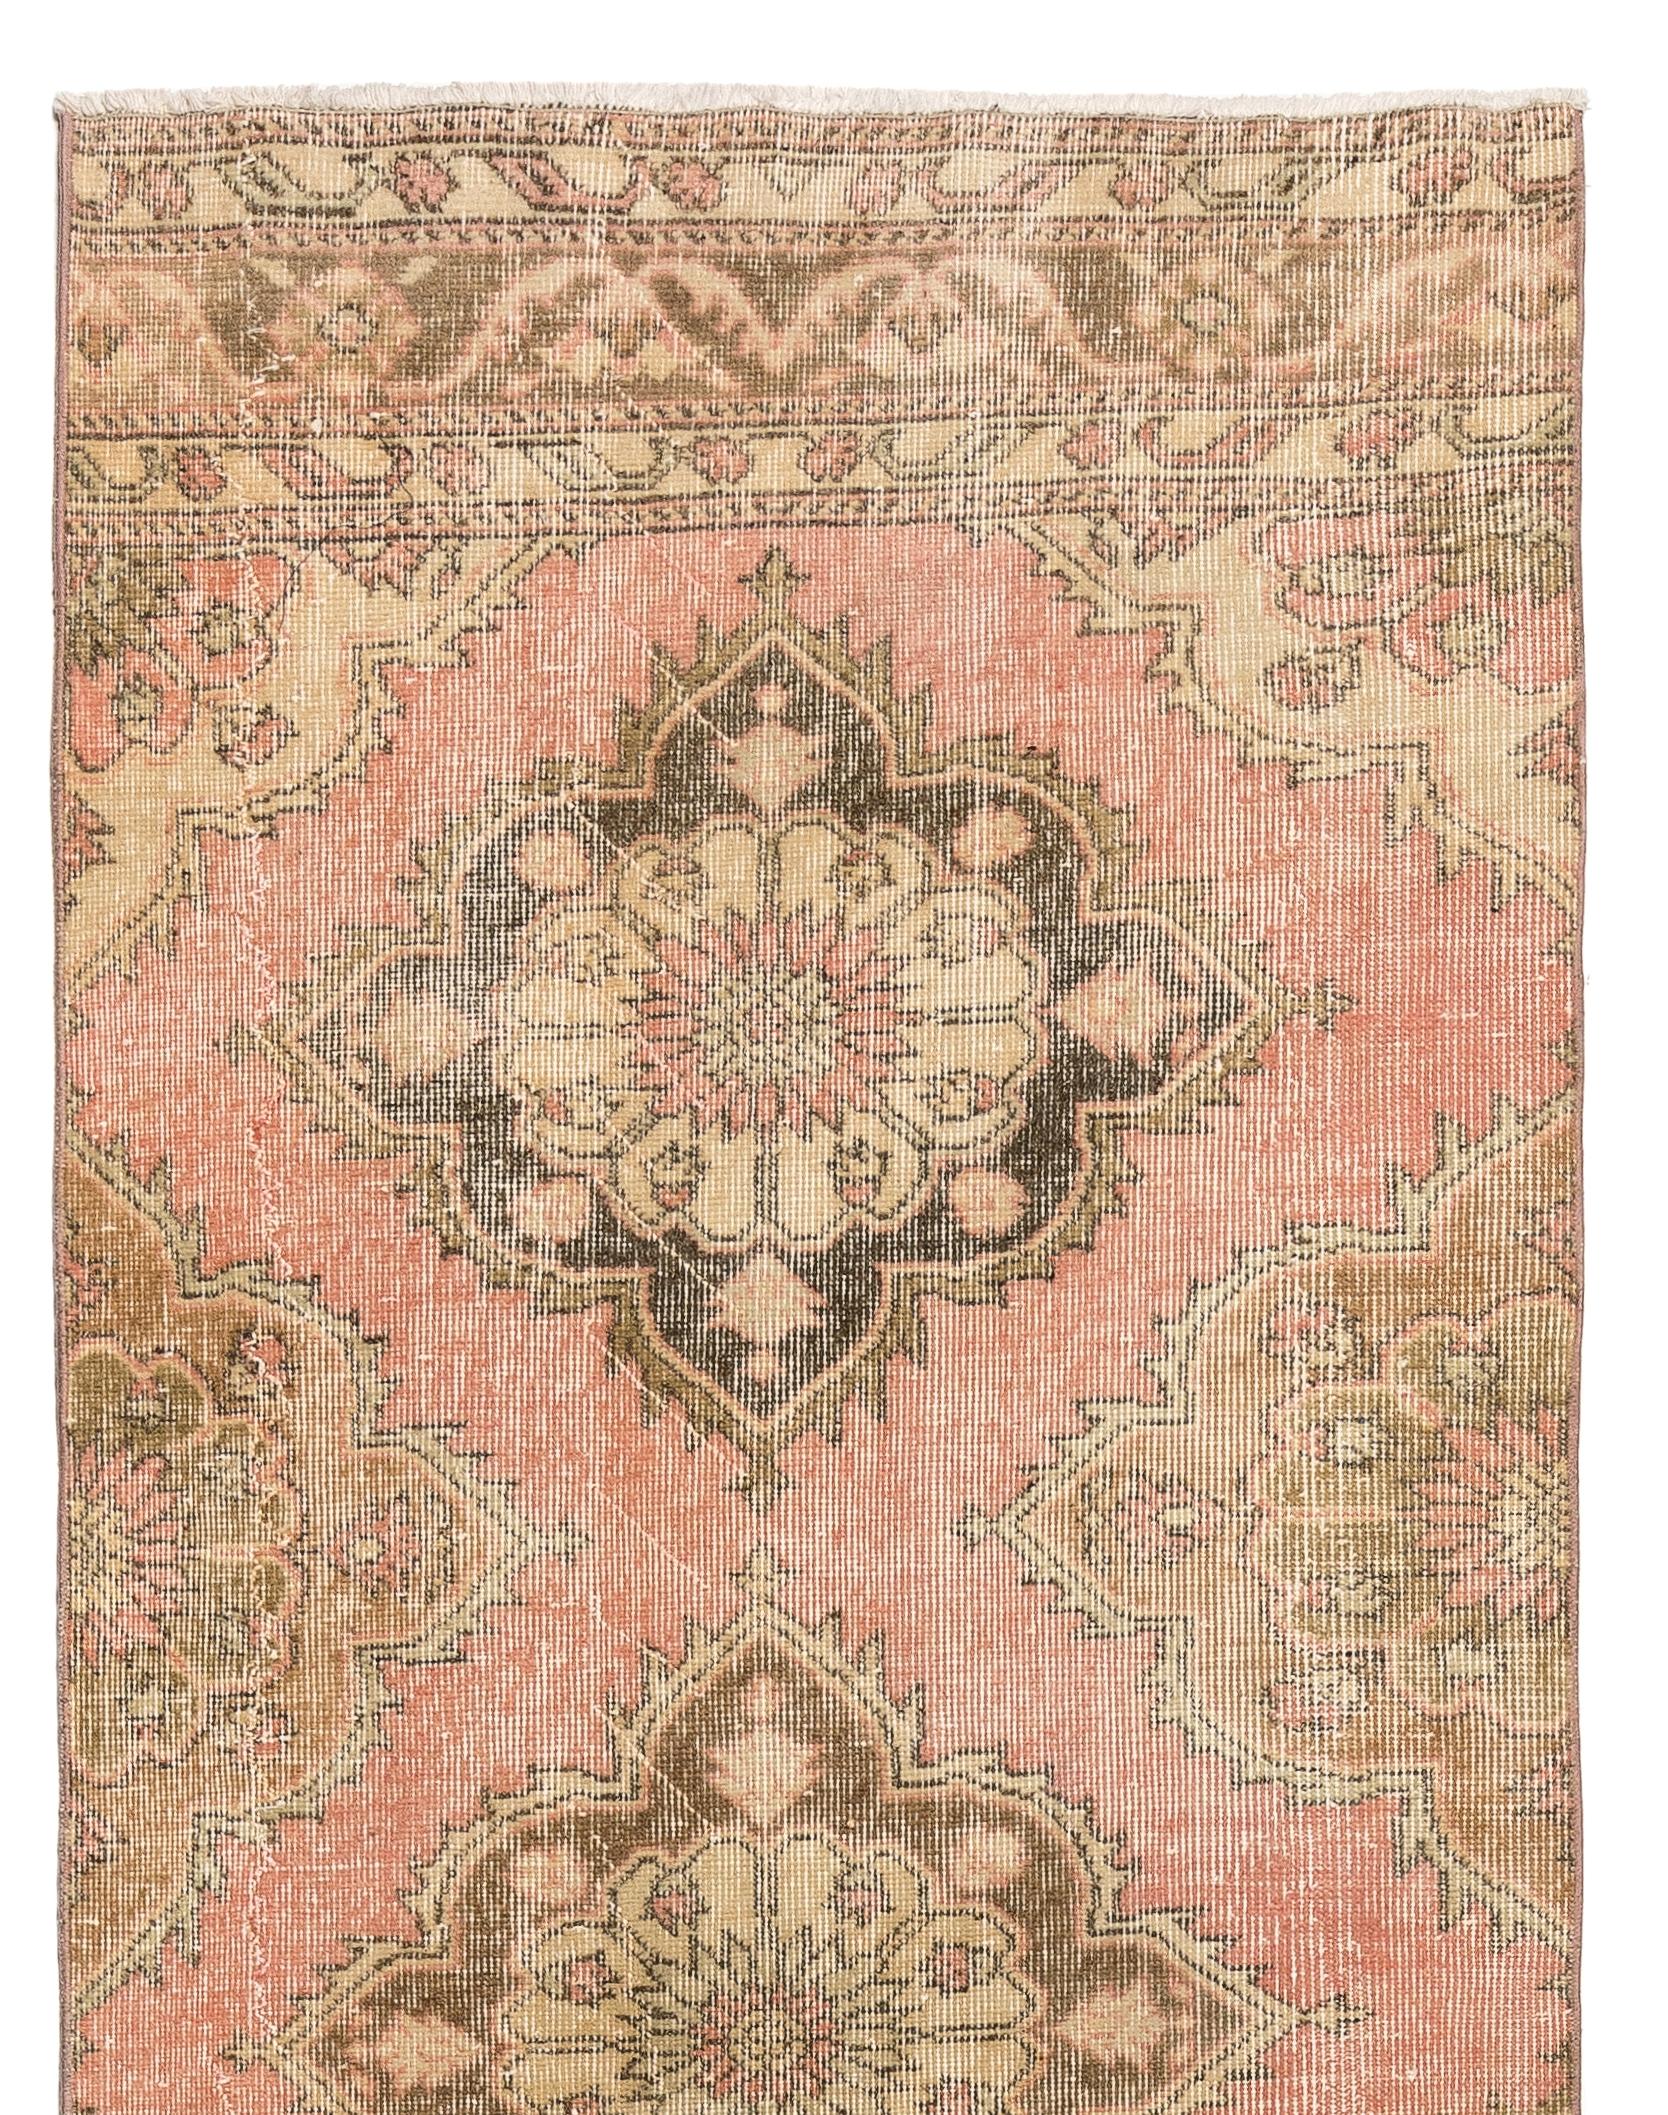 A vintage Turkish runner rug in soft colors. It was hand-knotted in the 1960s with low wool on cotton foundation and features a multiple medallion design. It is in very good condition, professionally-washed, sturdy and suitable for areas with high